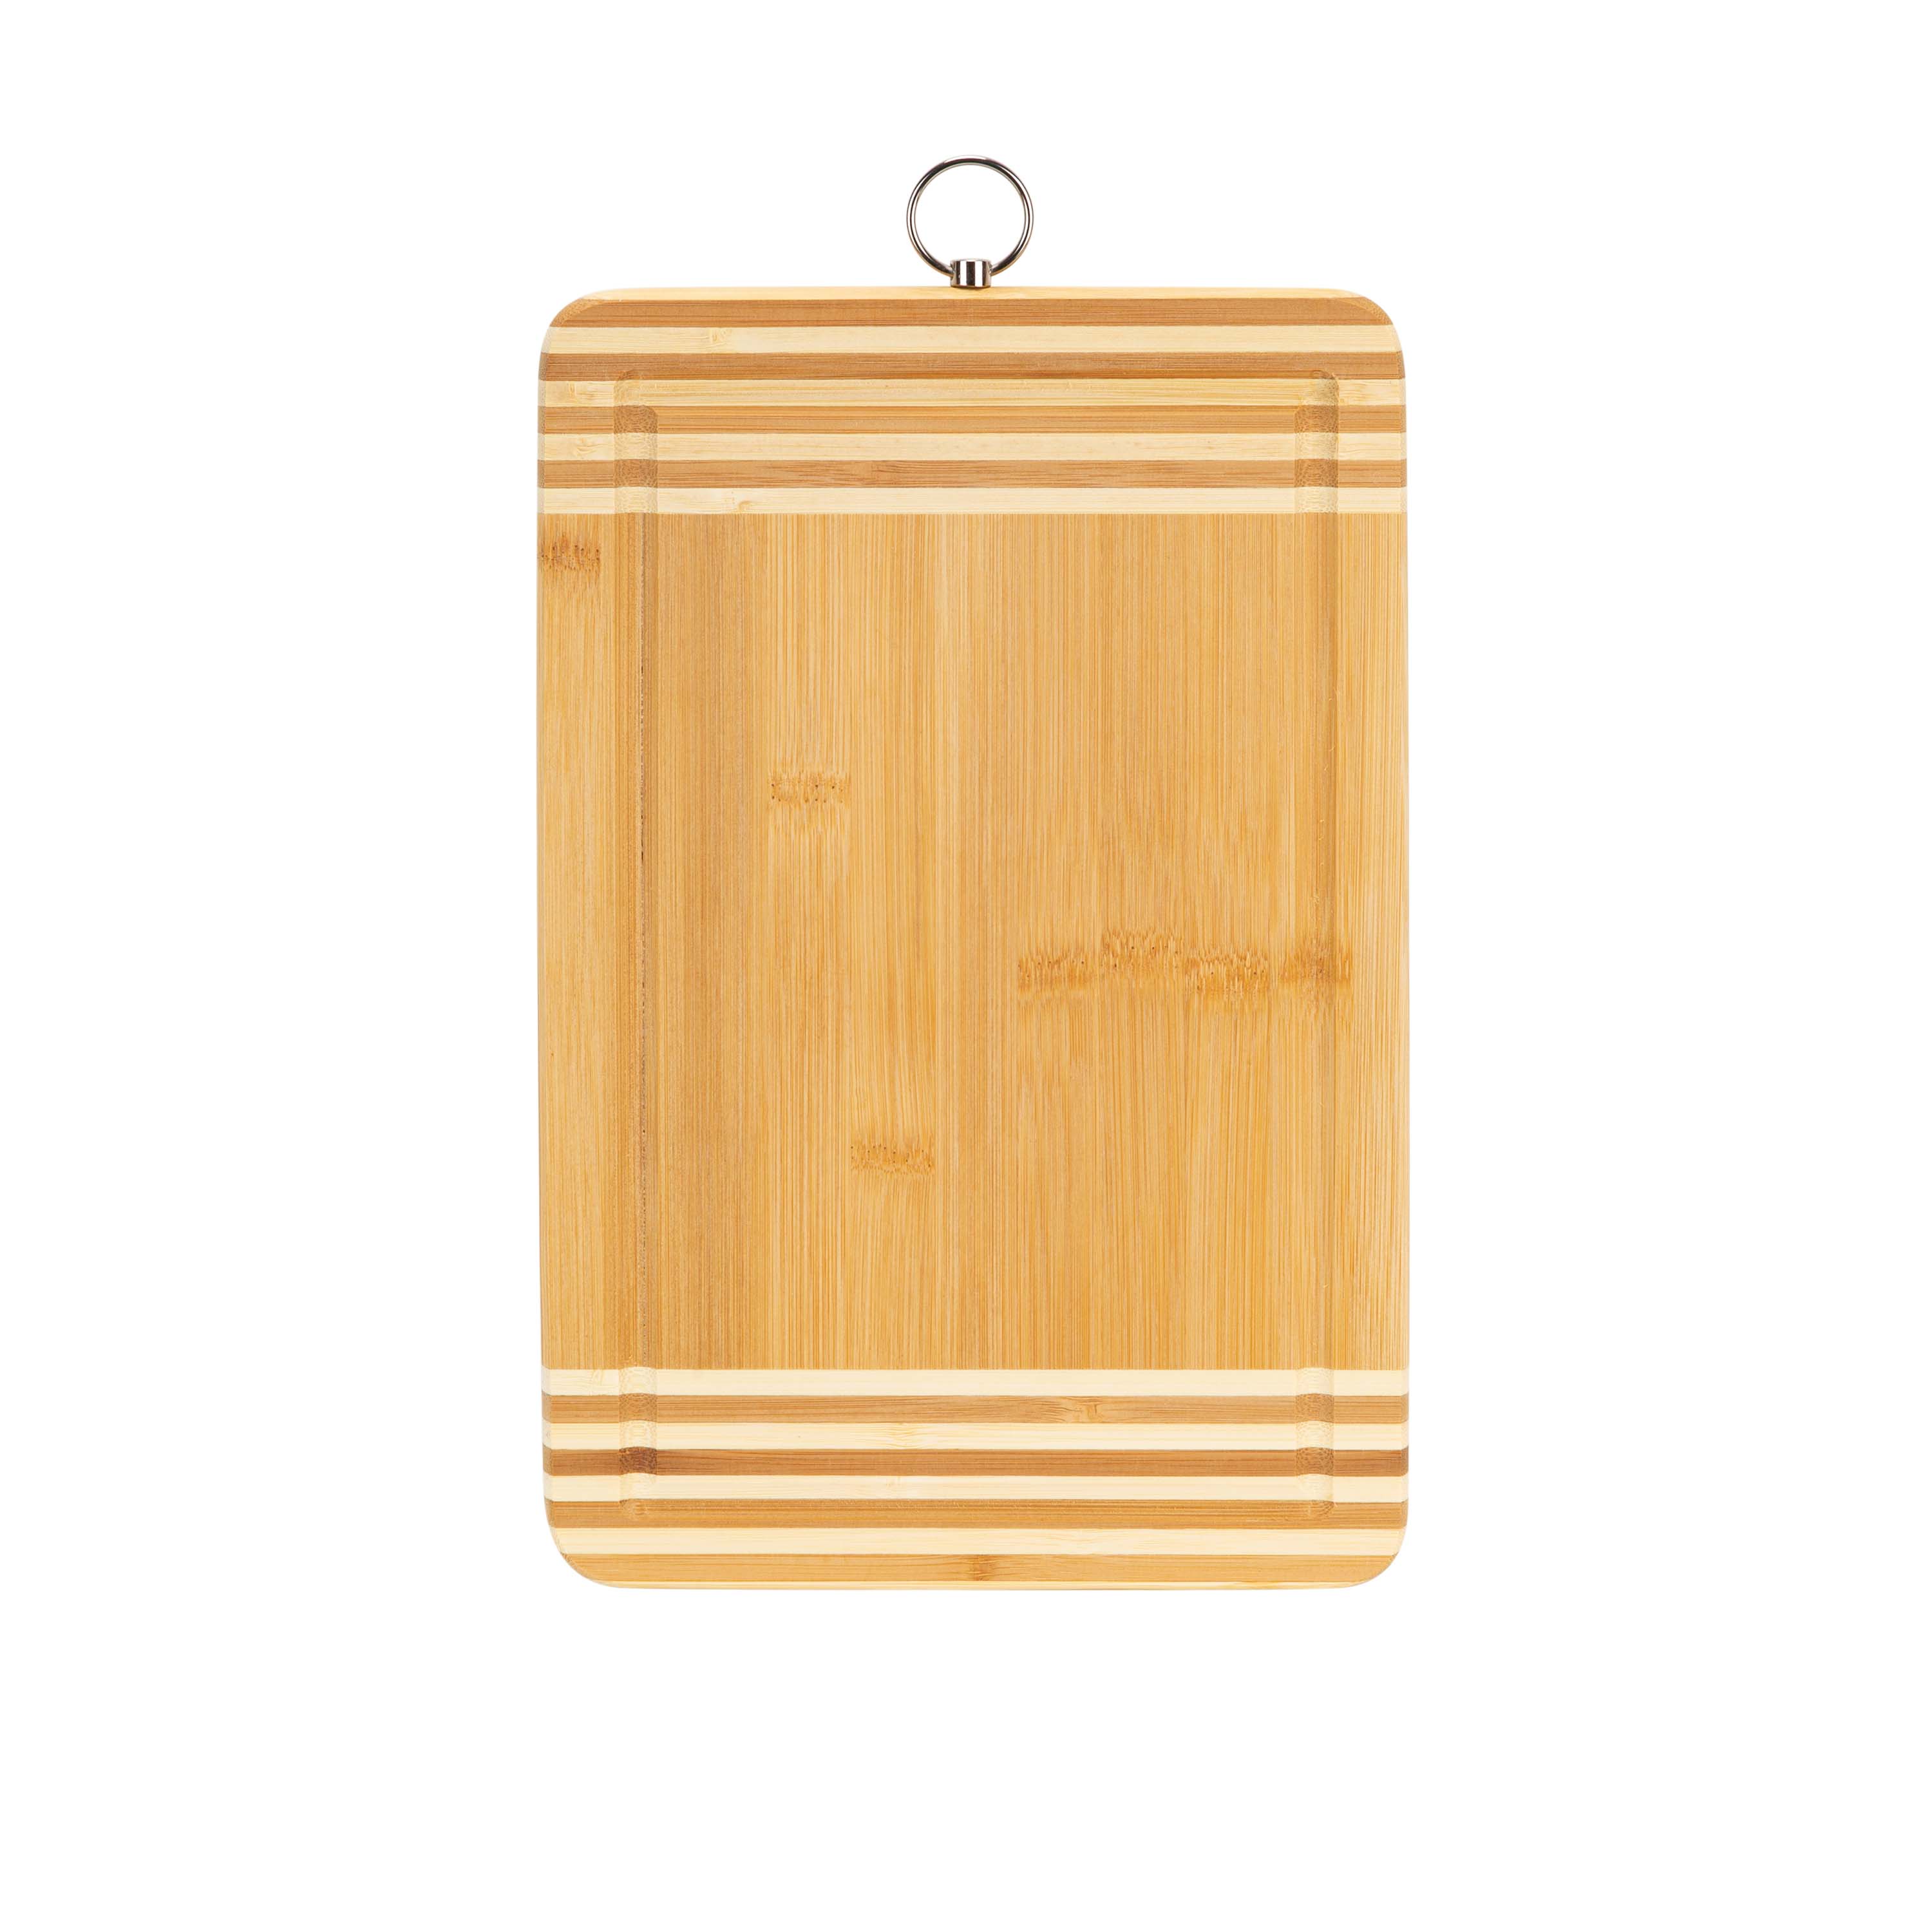 Premium Large Acacia Wood Cutting Board for Kitchen. 1.5in Extra Thick  Chopping Board